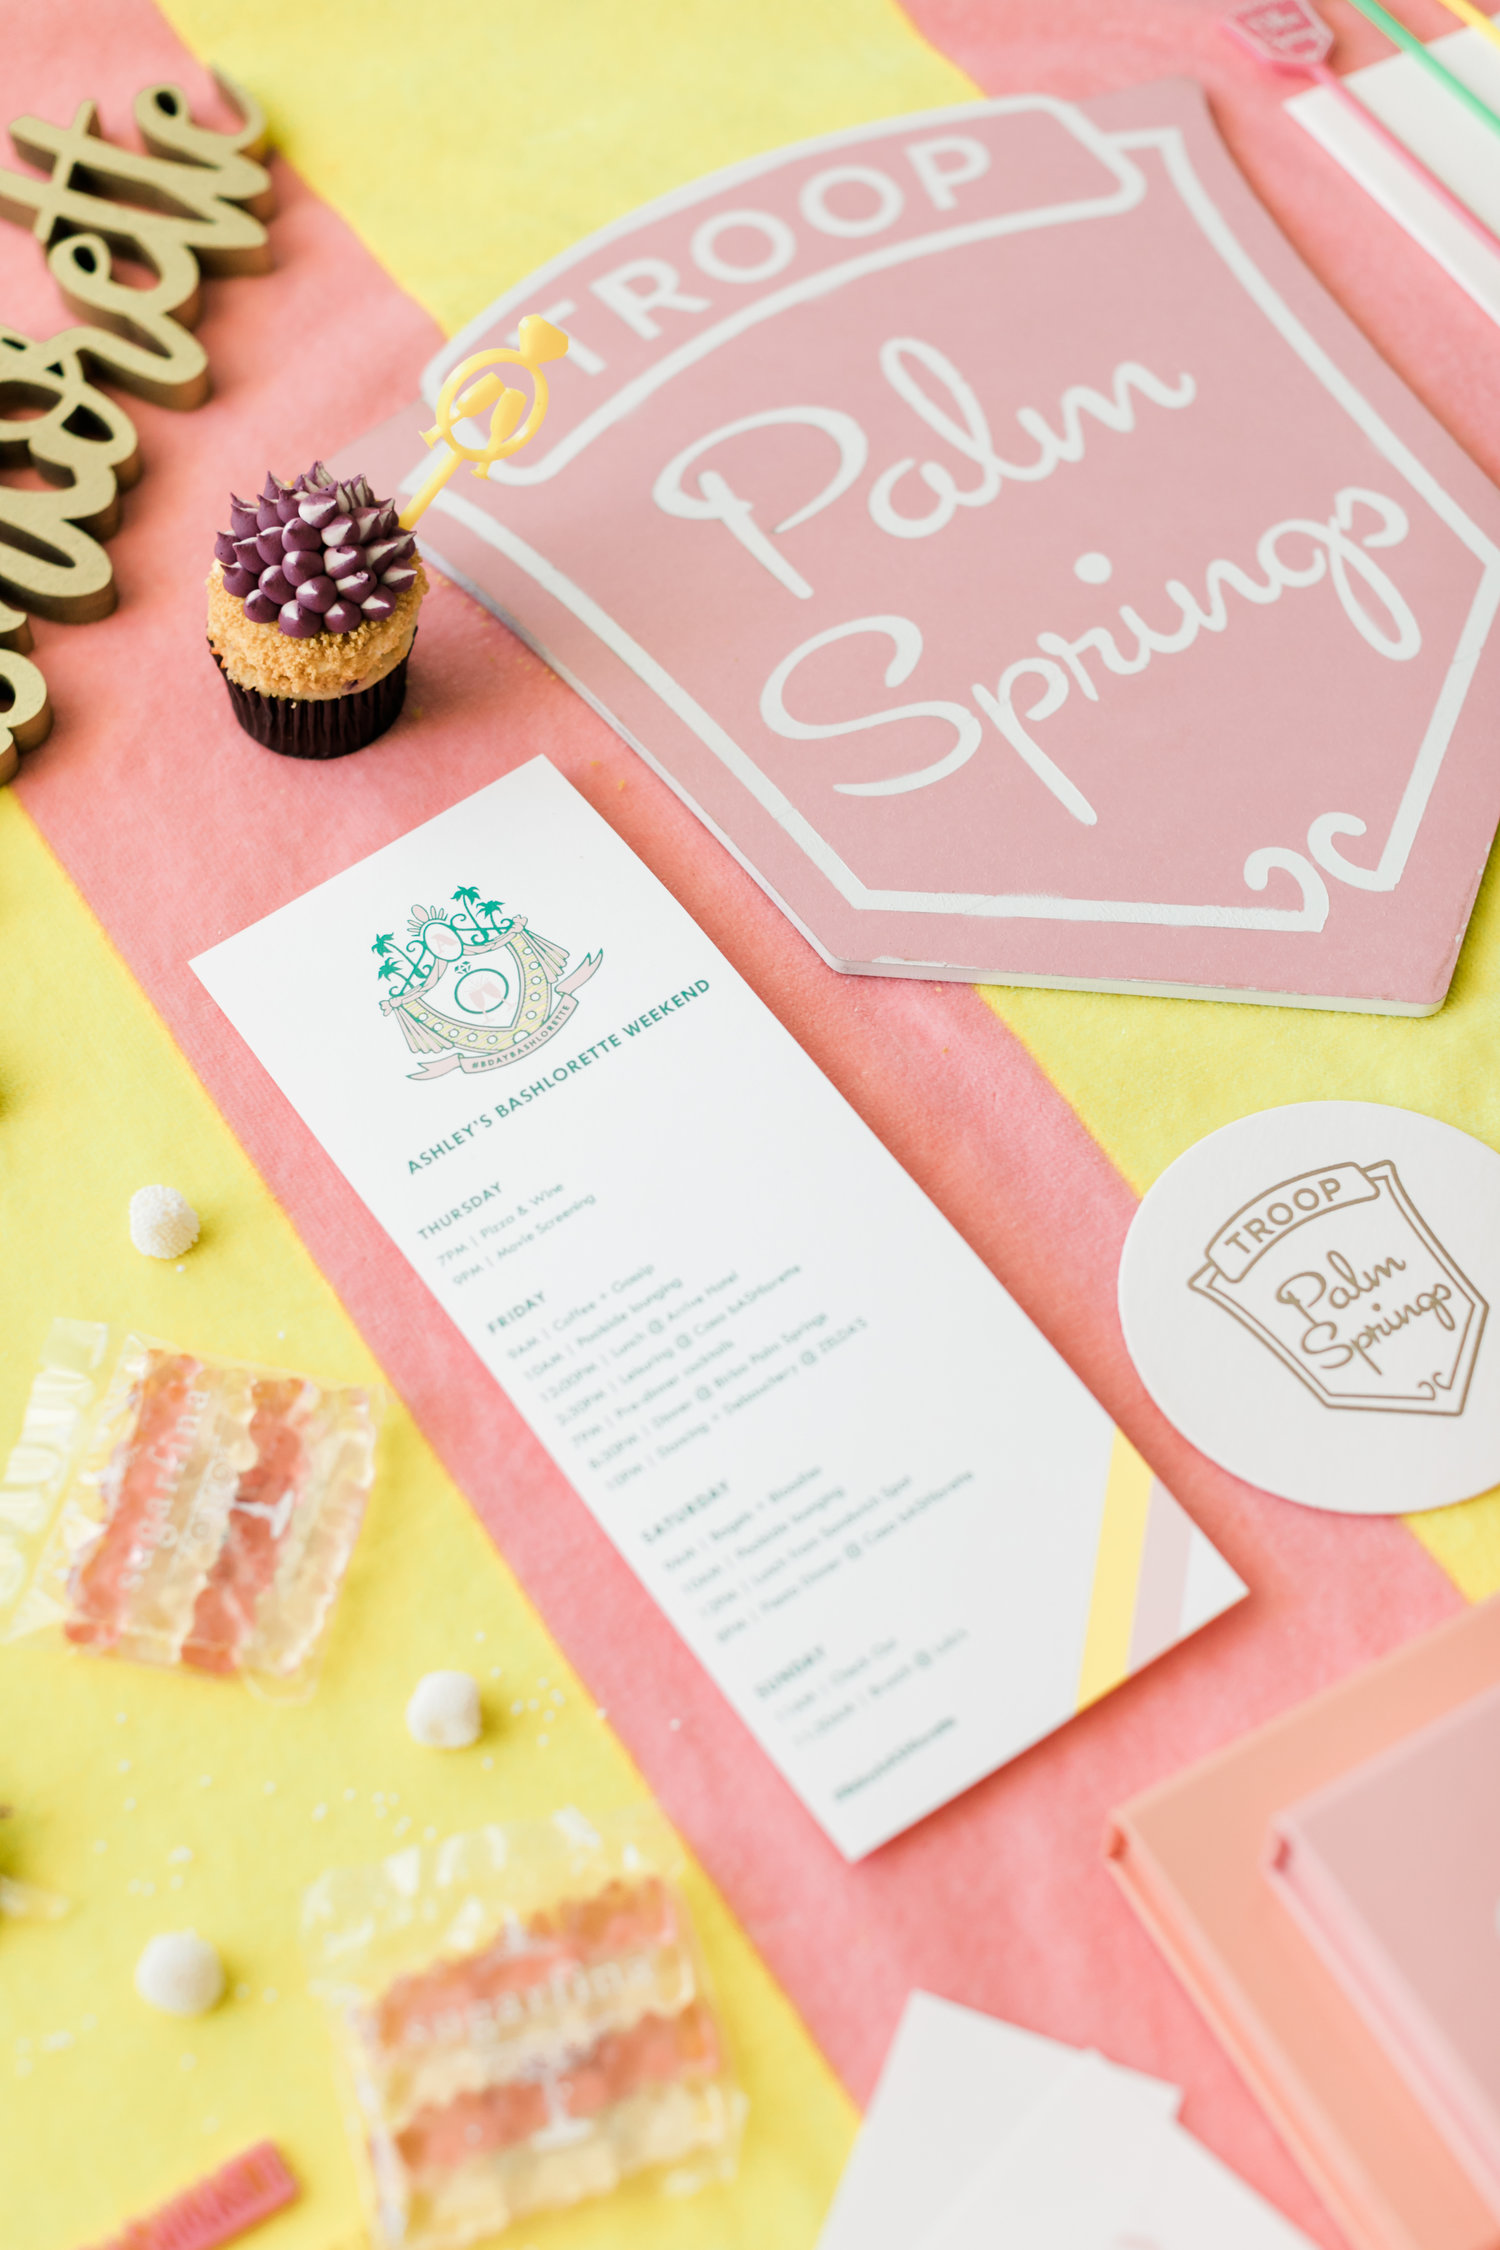 Troop Palm Springs pink, yellow, and white decor and printed collateral, including itinerary, mini cupcake, candies, and other bachelorette accoutrement